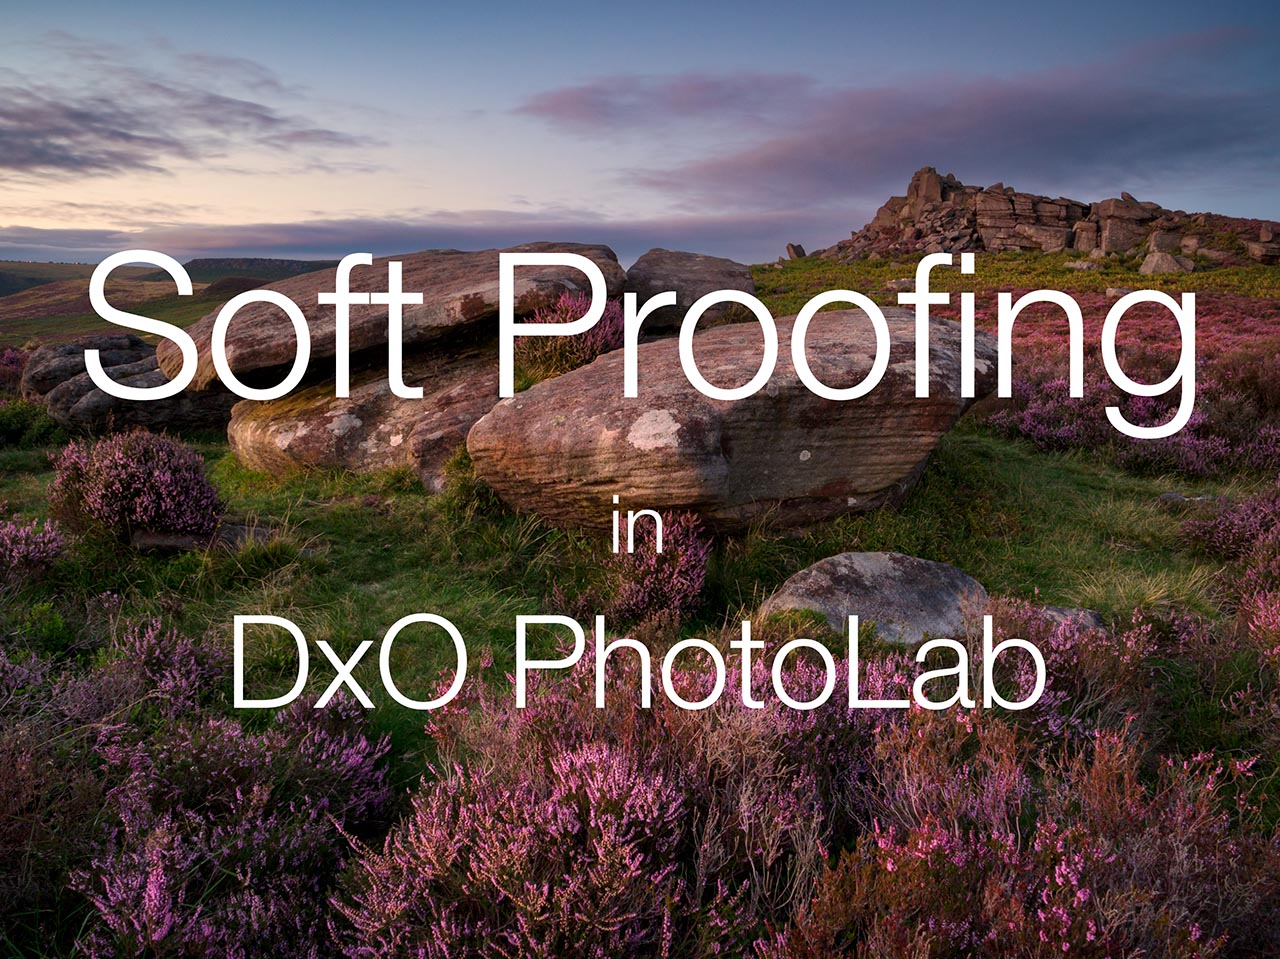 What You Should Know About DxO PhotoLab Soft Proofing